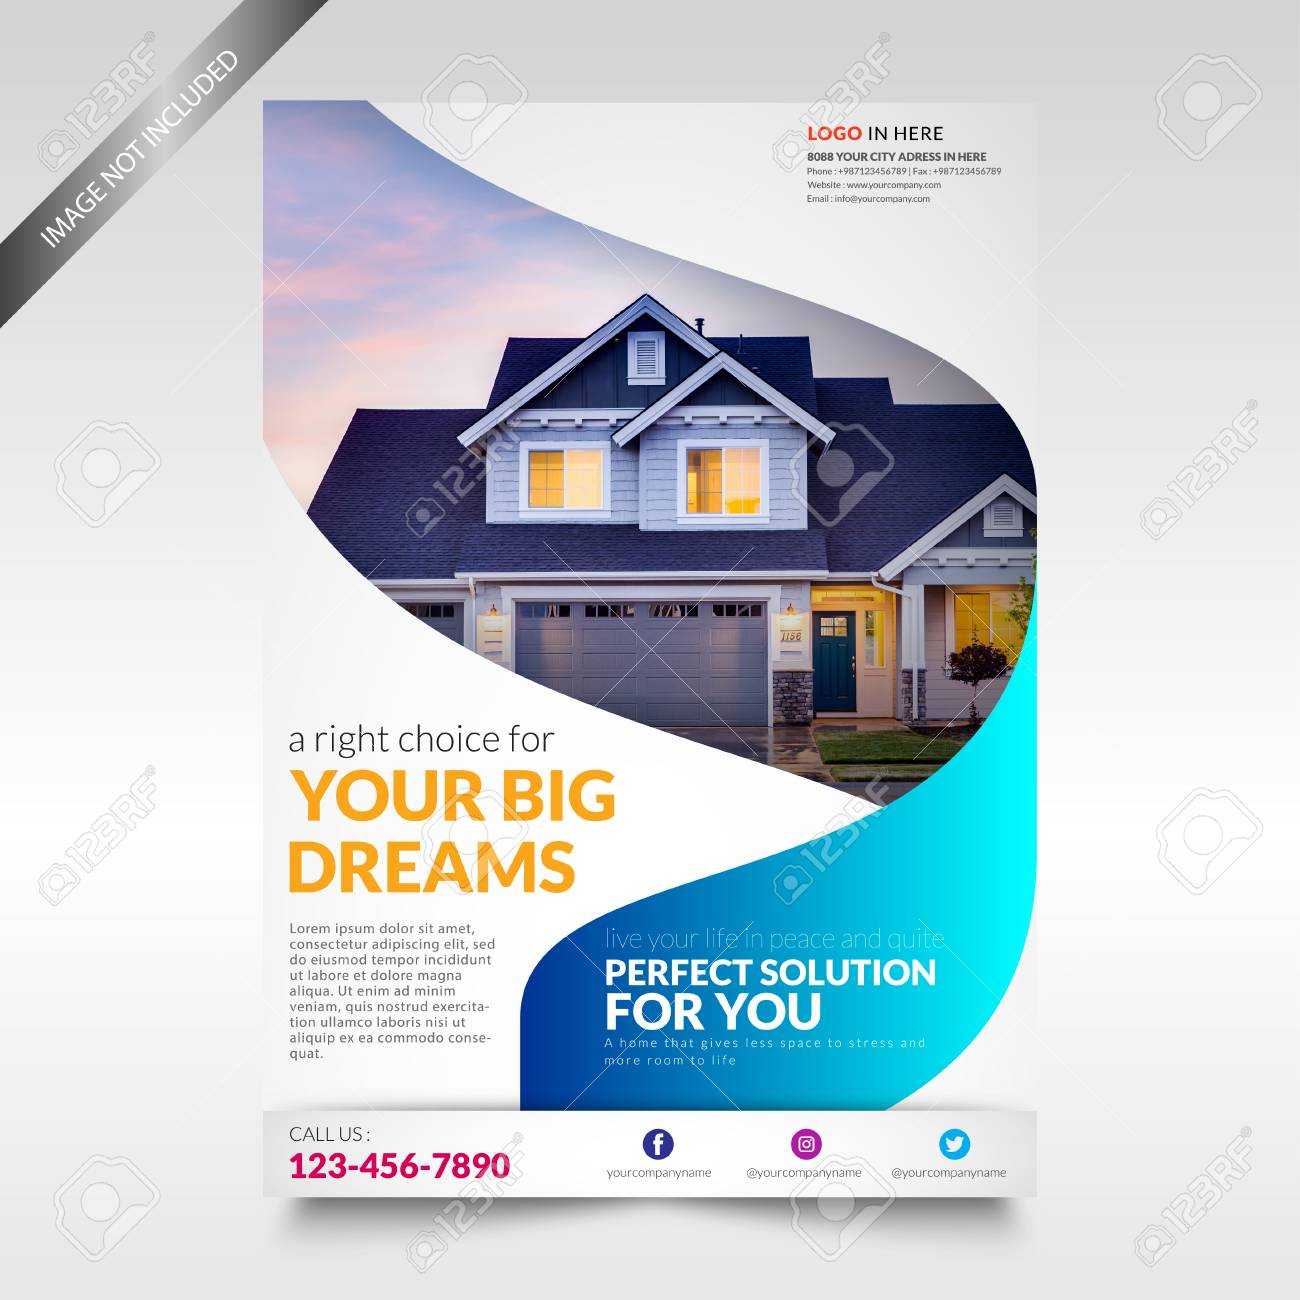 027 Free Real Estate Flyer Templates For Saleowner Throughout For Sale By Owner Template